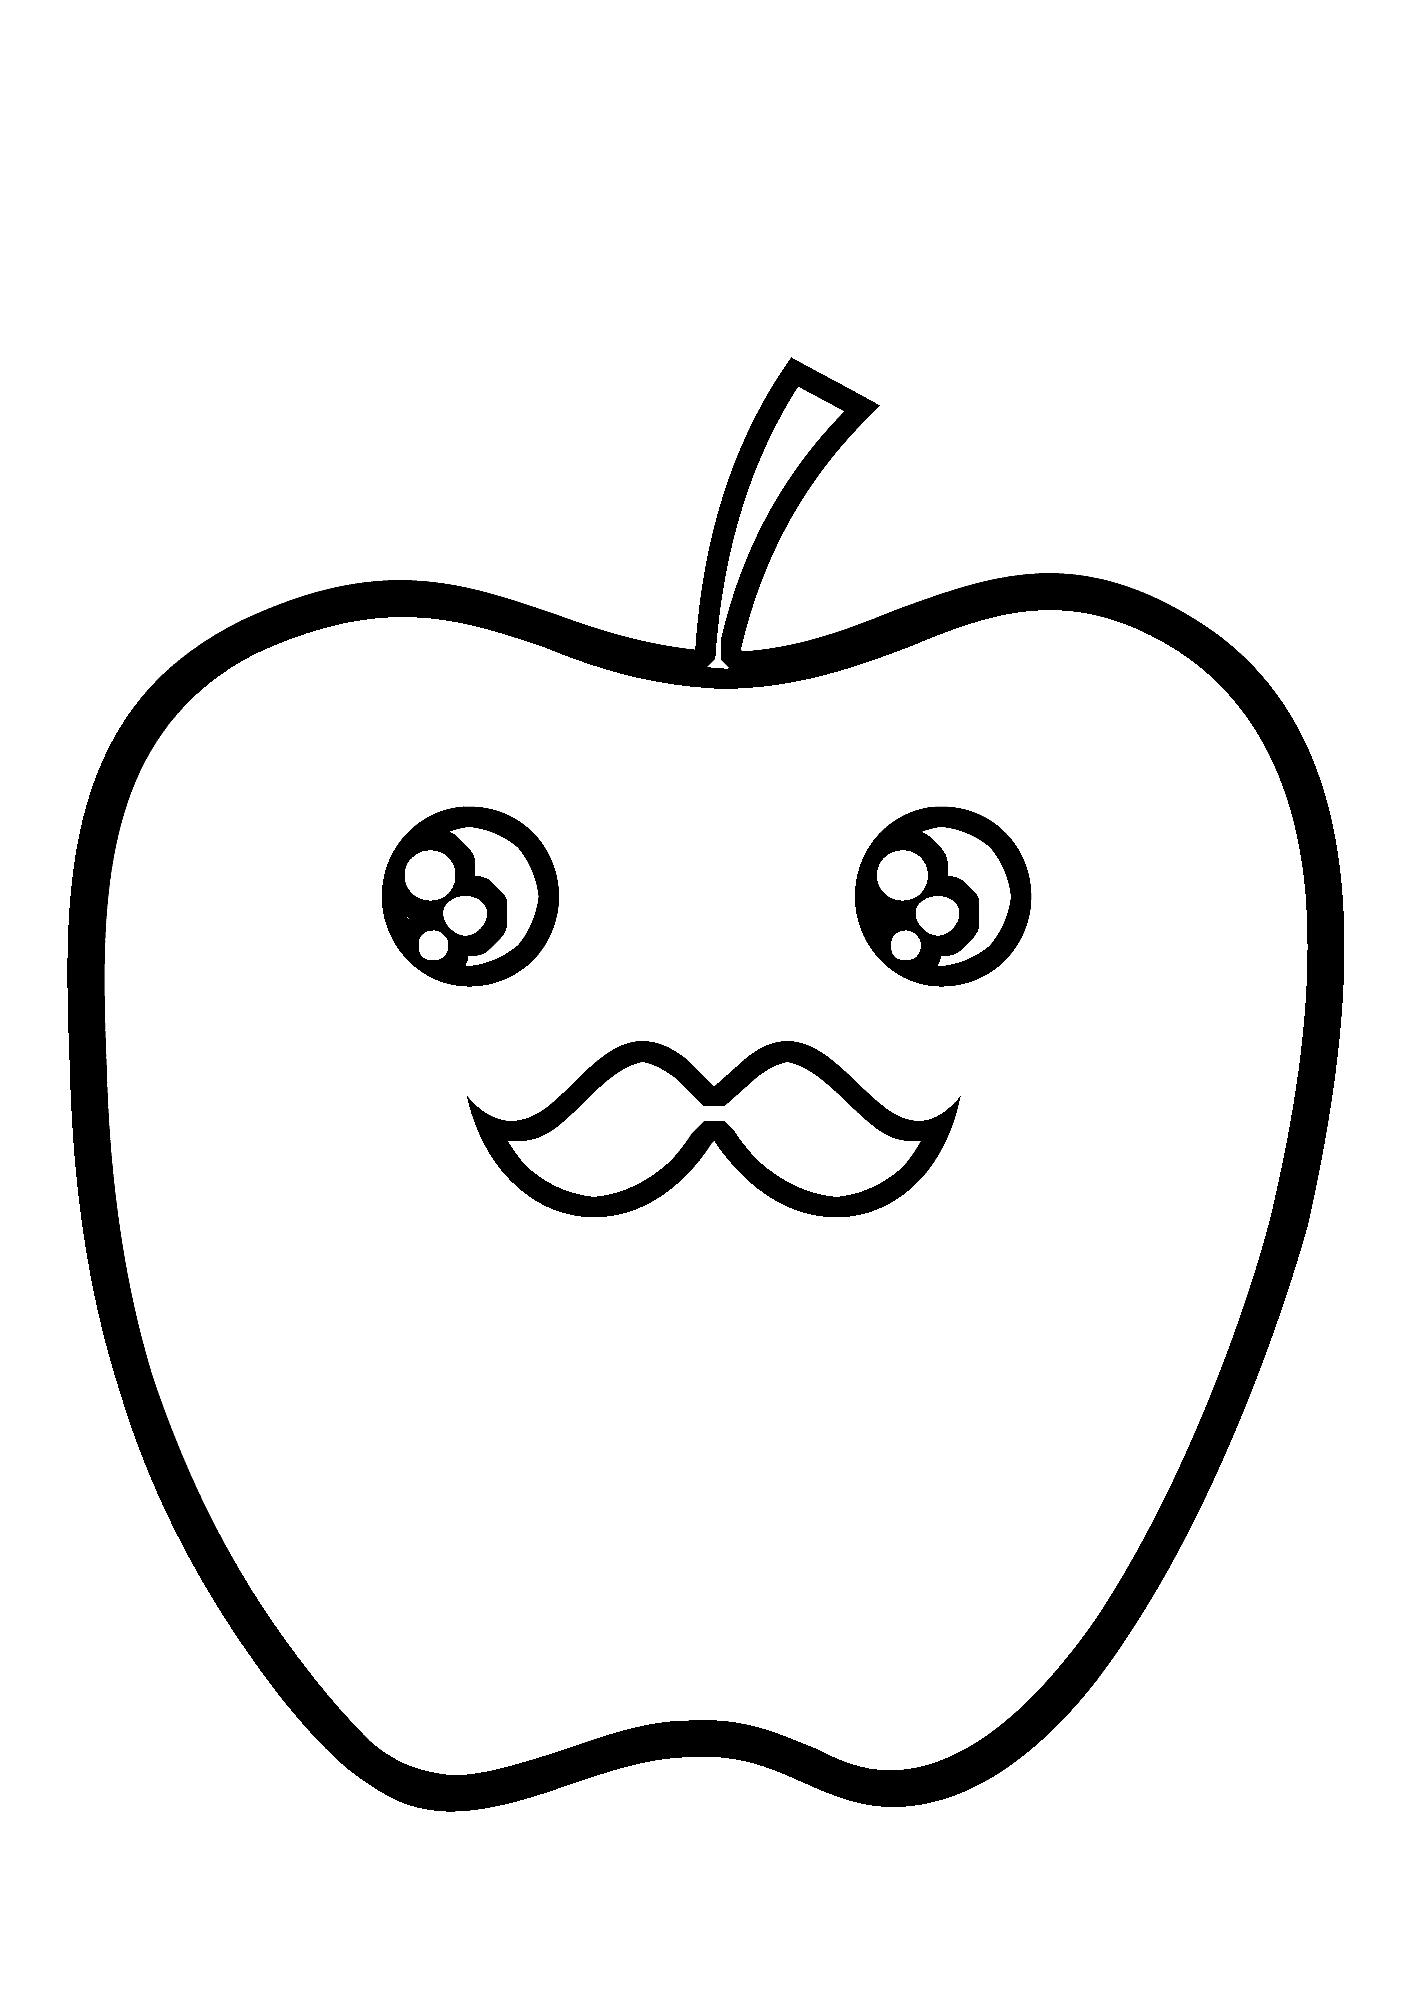 Cute Apple Illustration With Mustache Coloring Pages